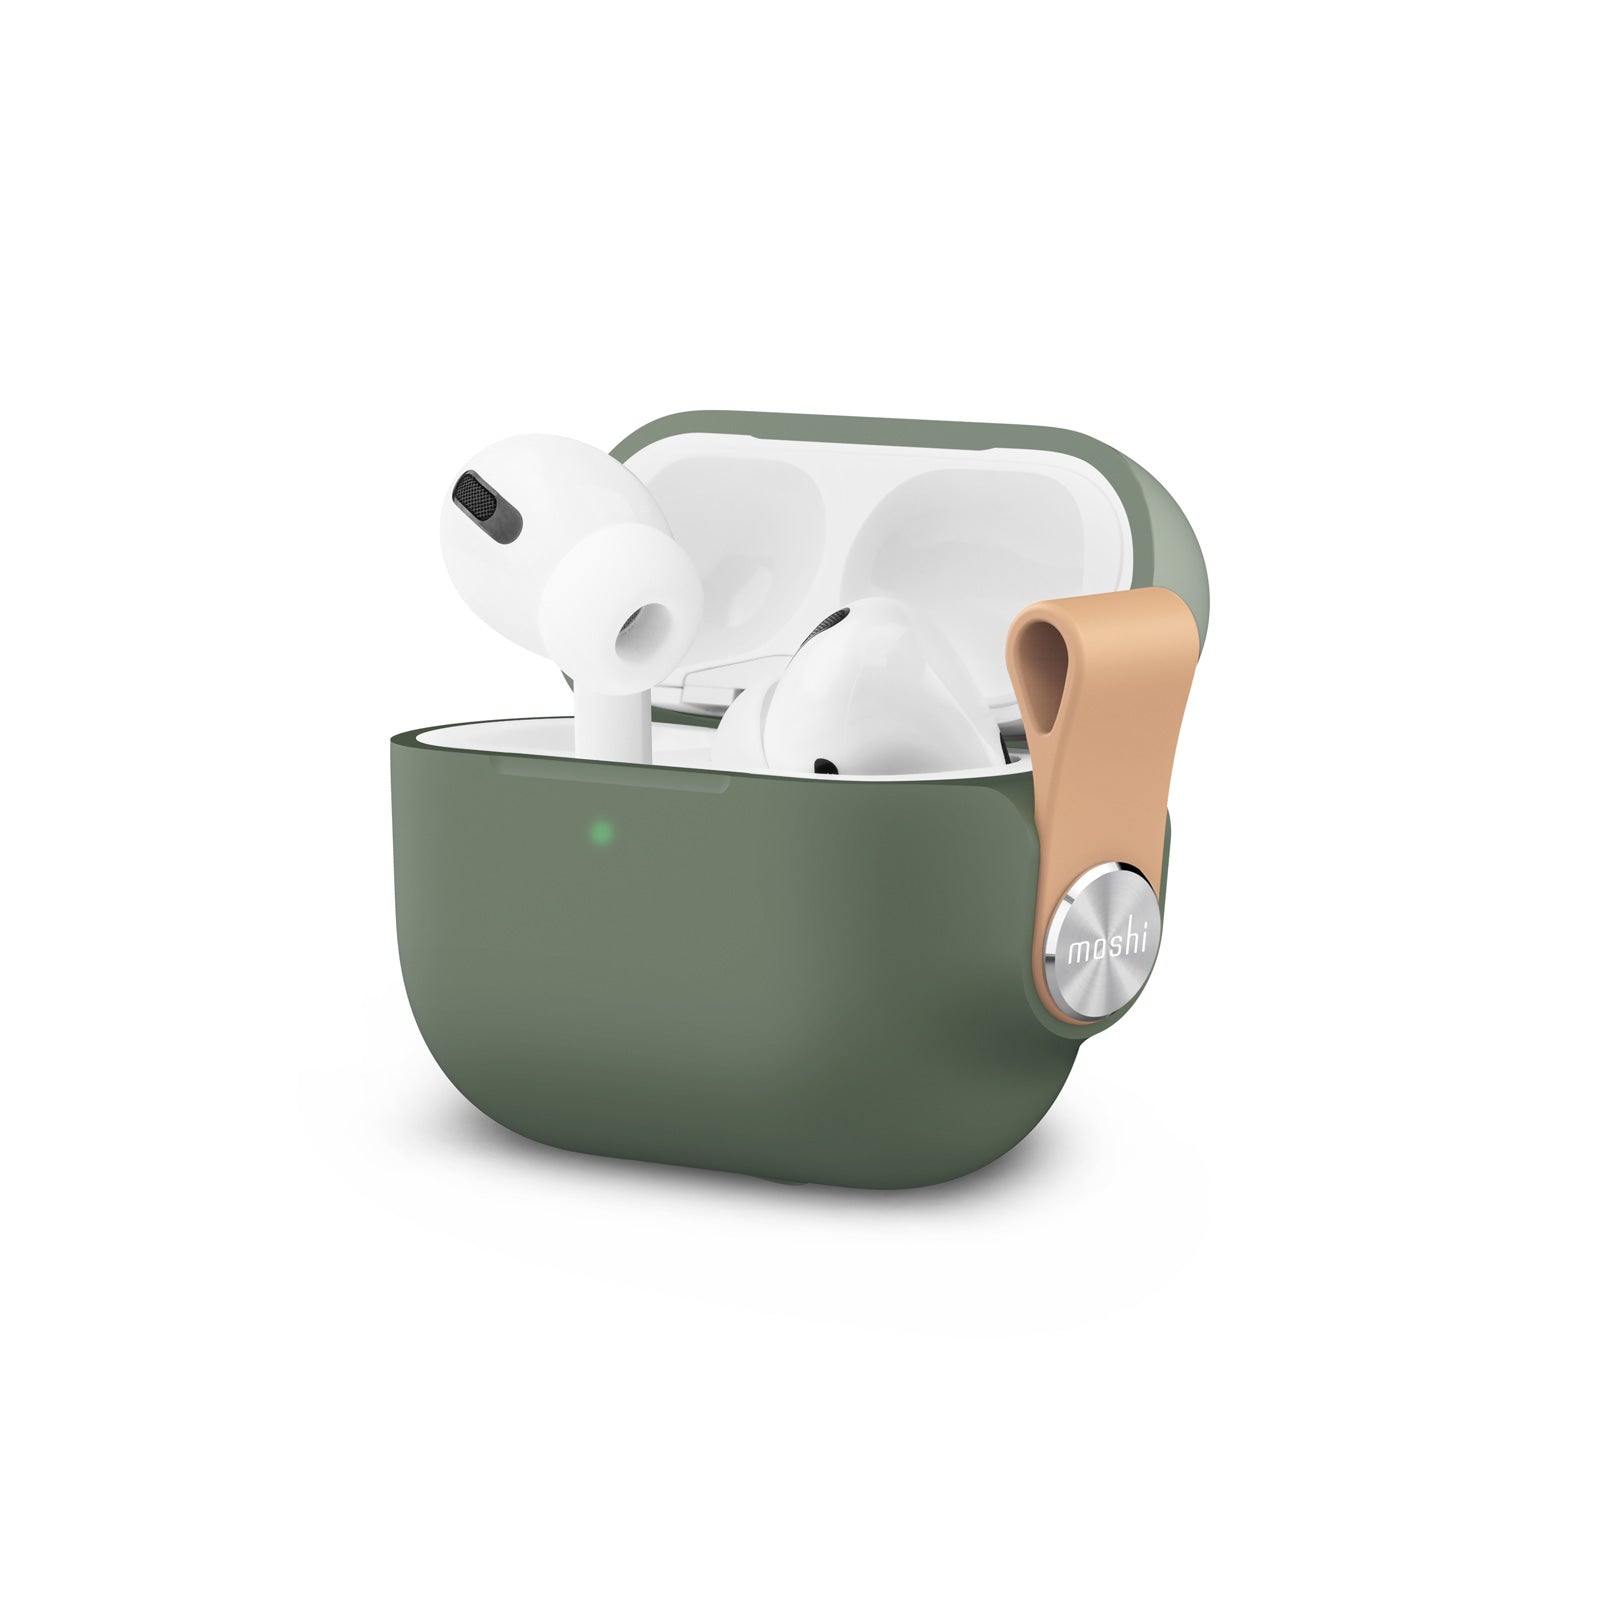 Pebbo Protective Case for AirPods – us.moshi (US)